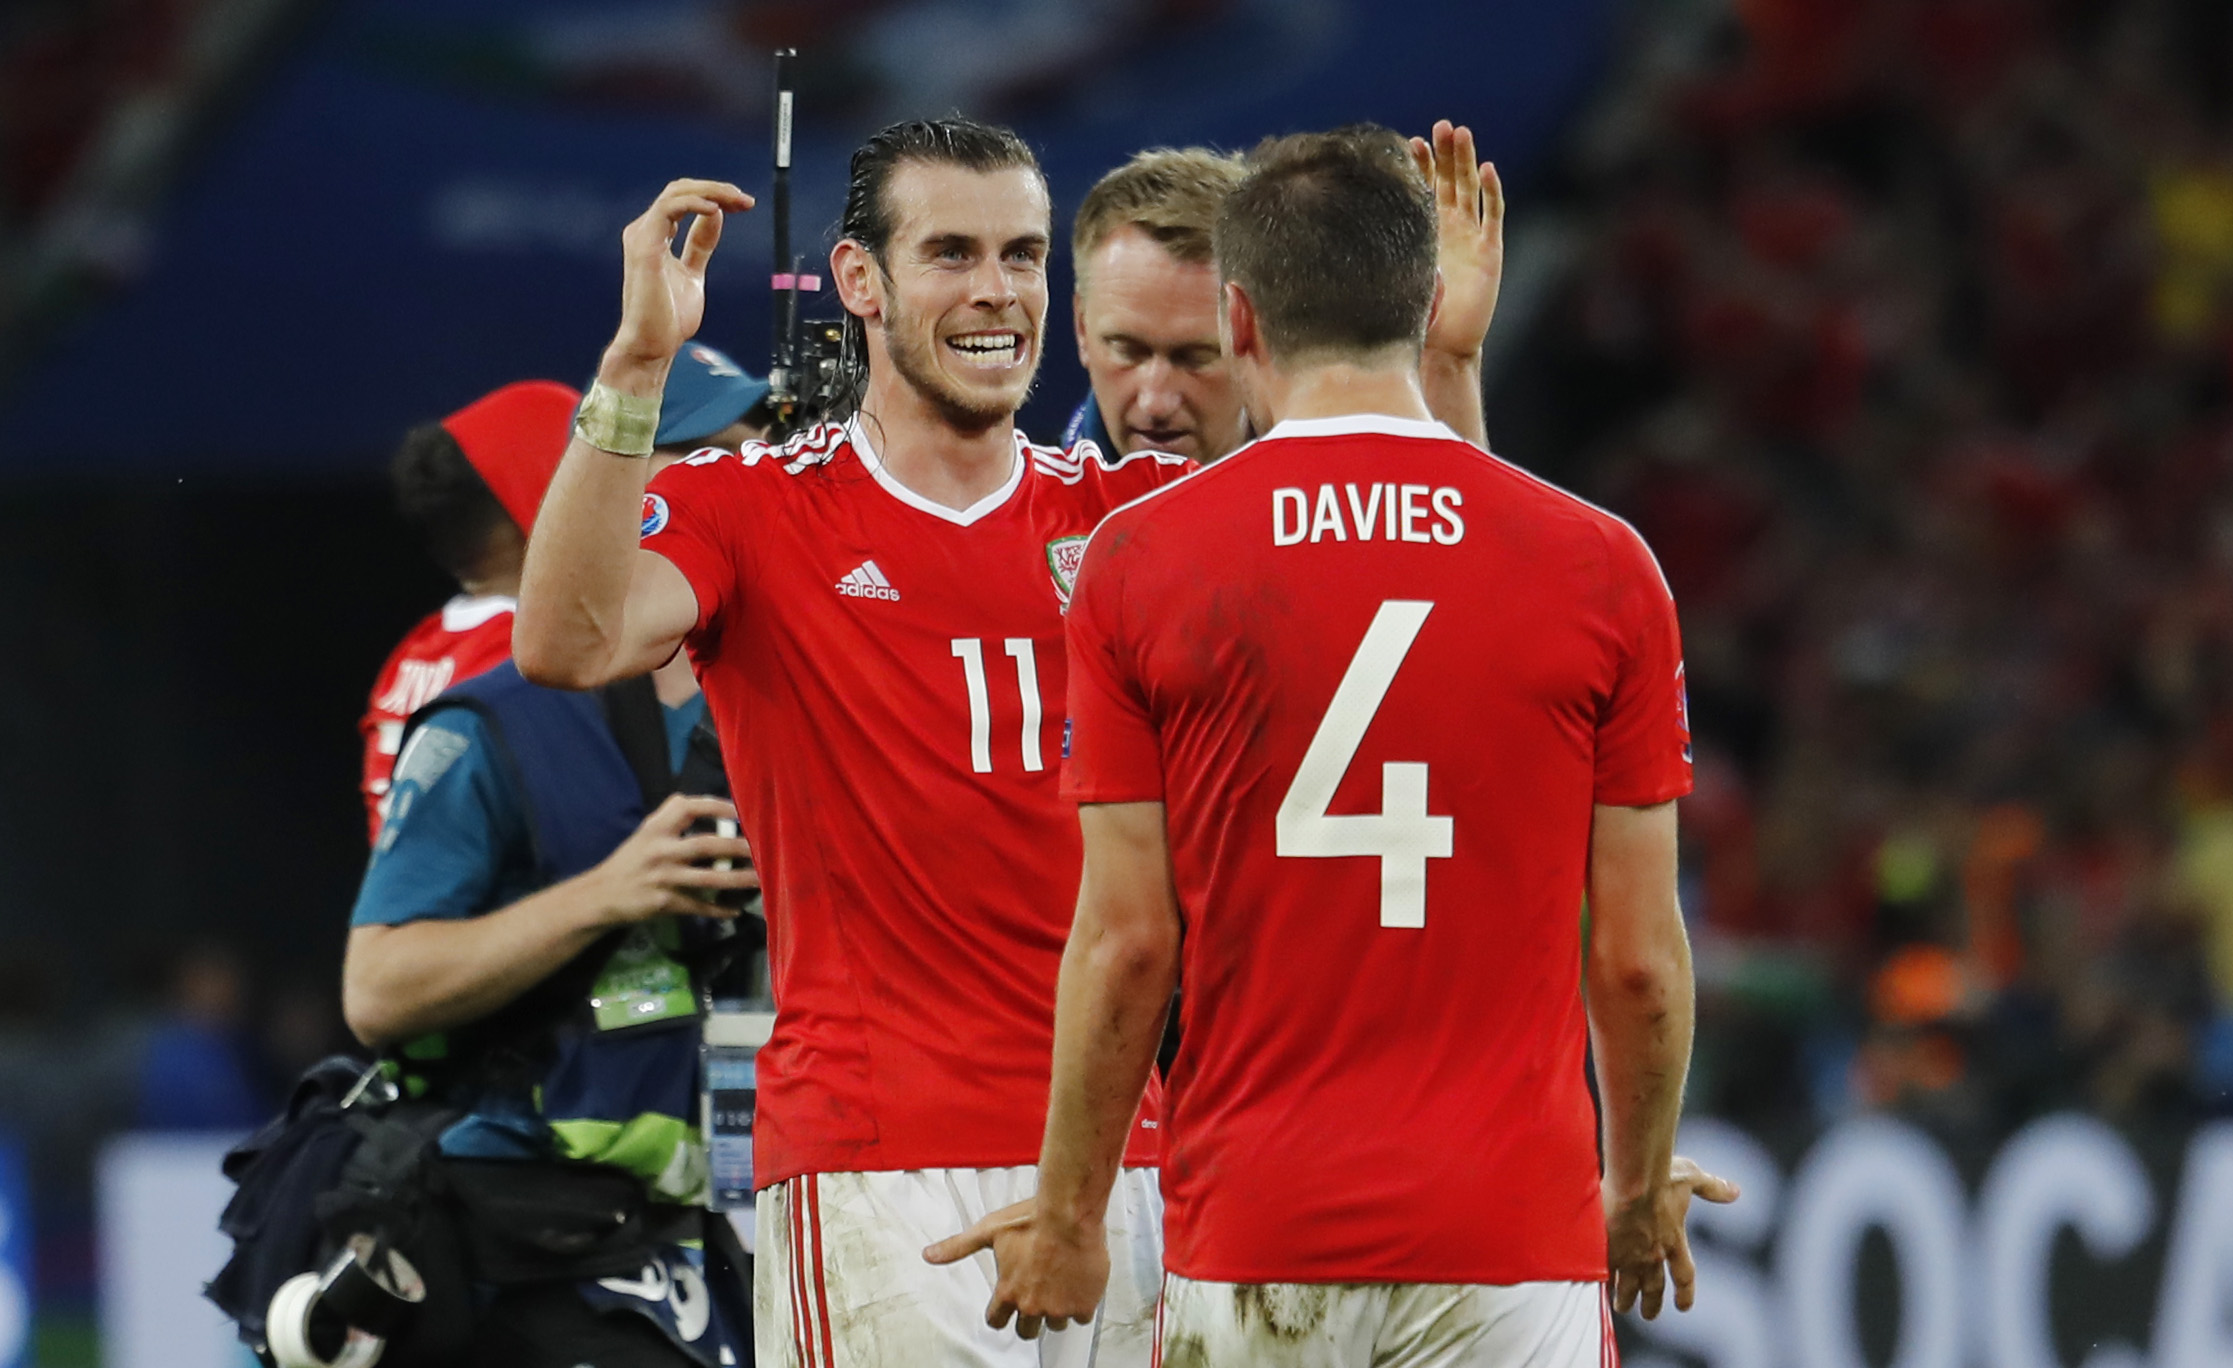 Euro 2016: Wales down Belgium to reach first ever semi-final